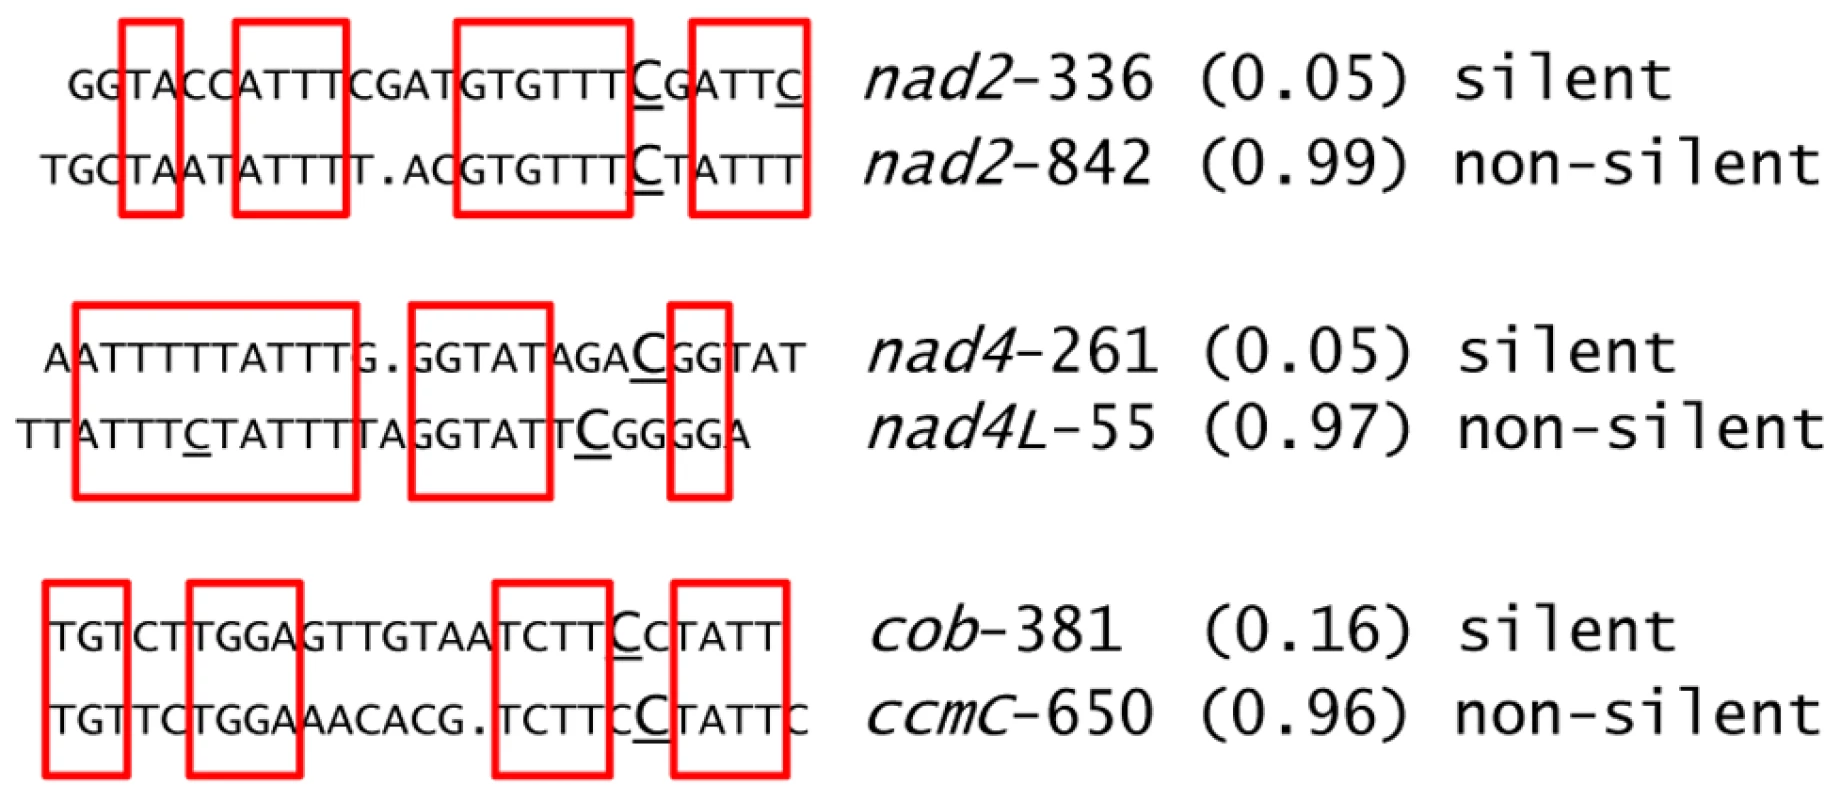 Examples of newly identified editing sites having sequences in their putative <i>cis</i> elements similar to known editing sites.